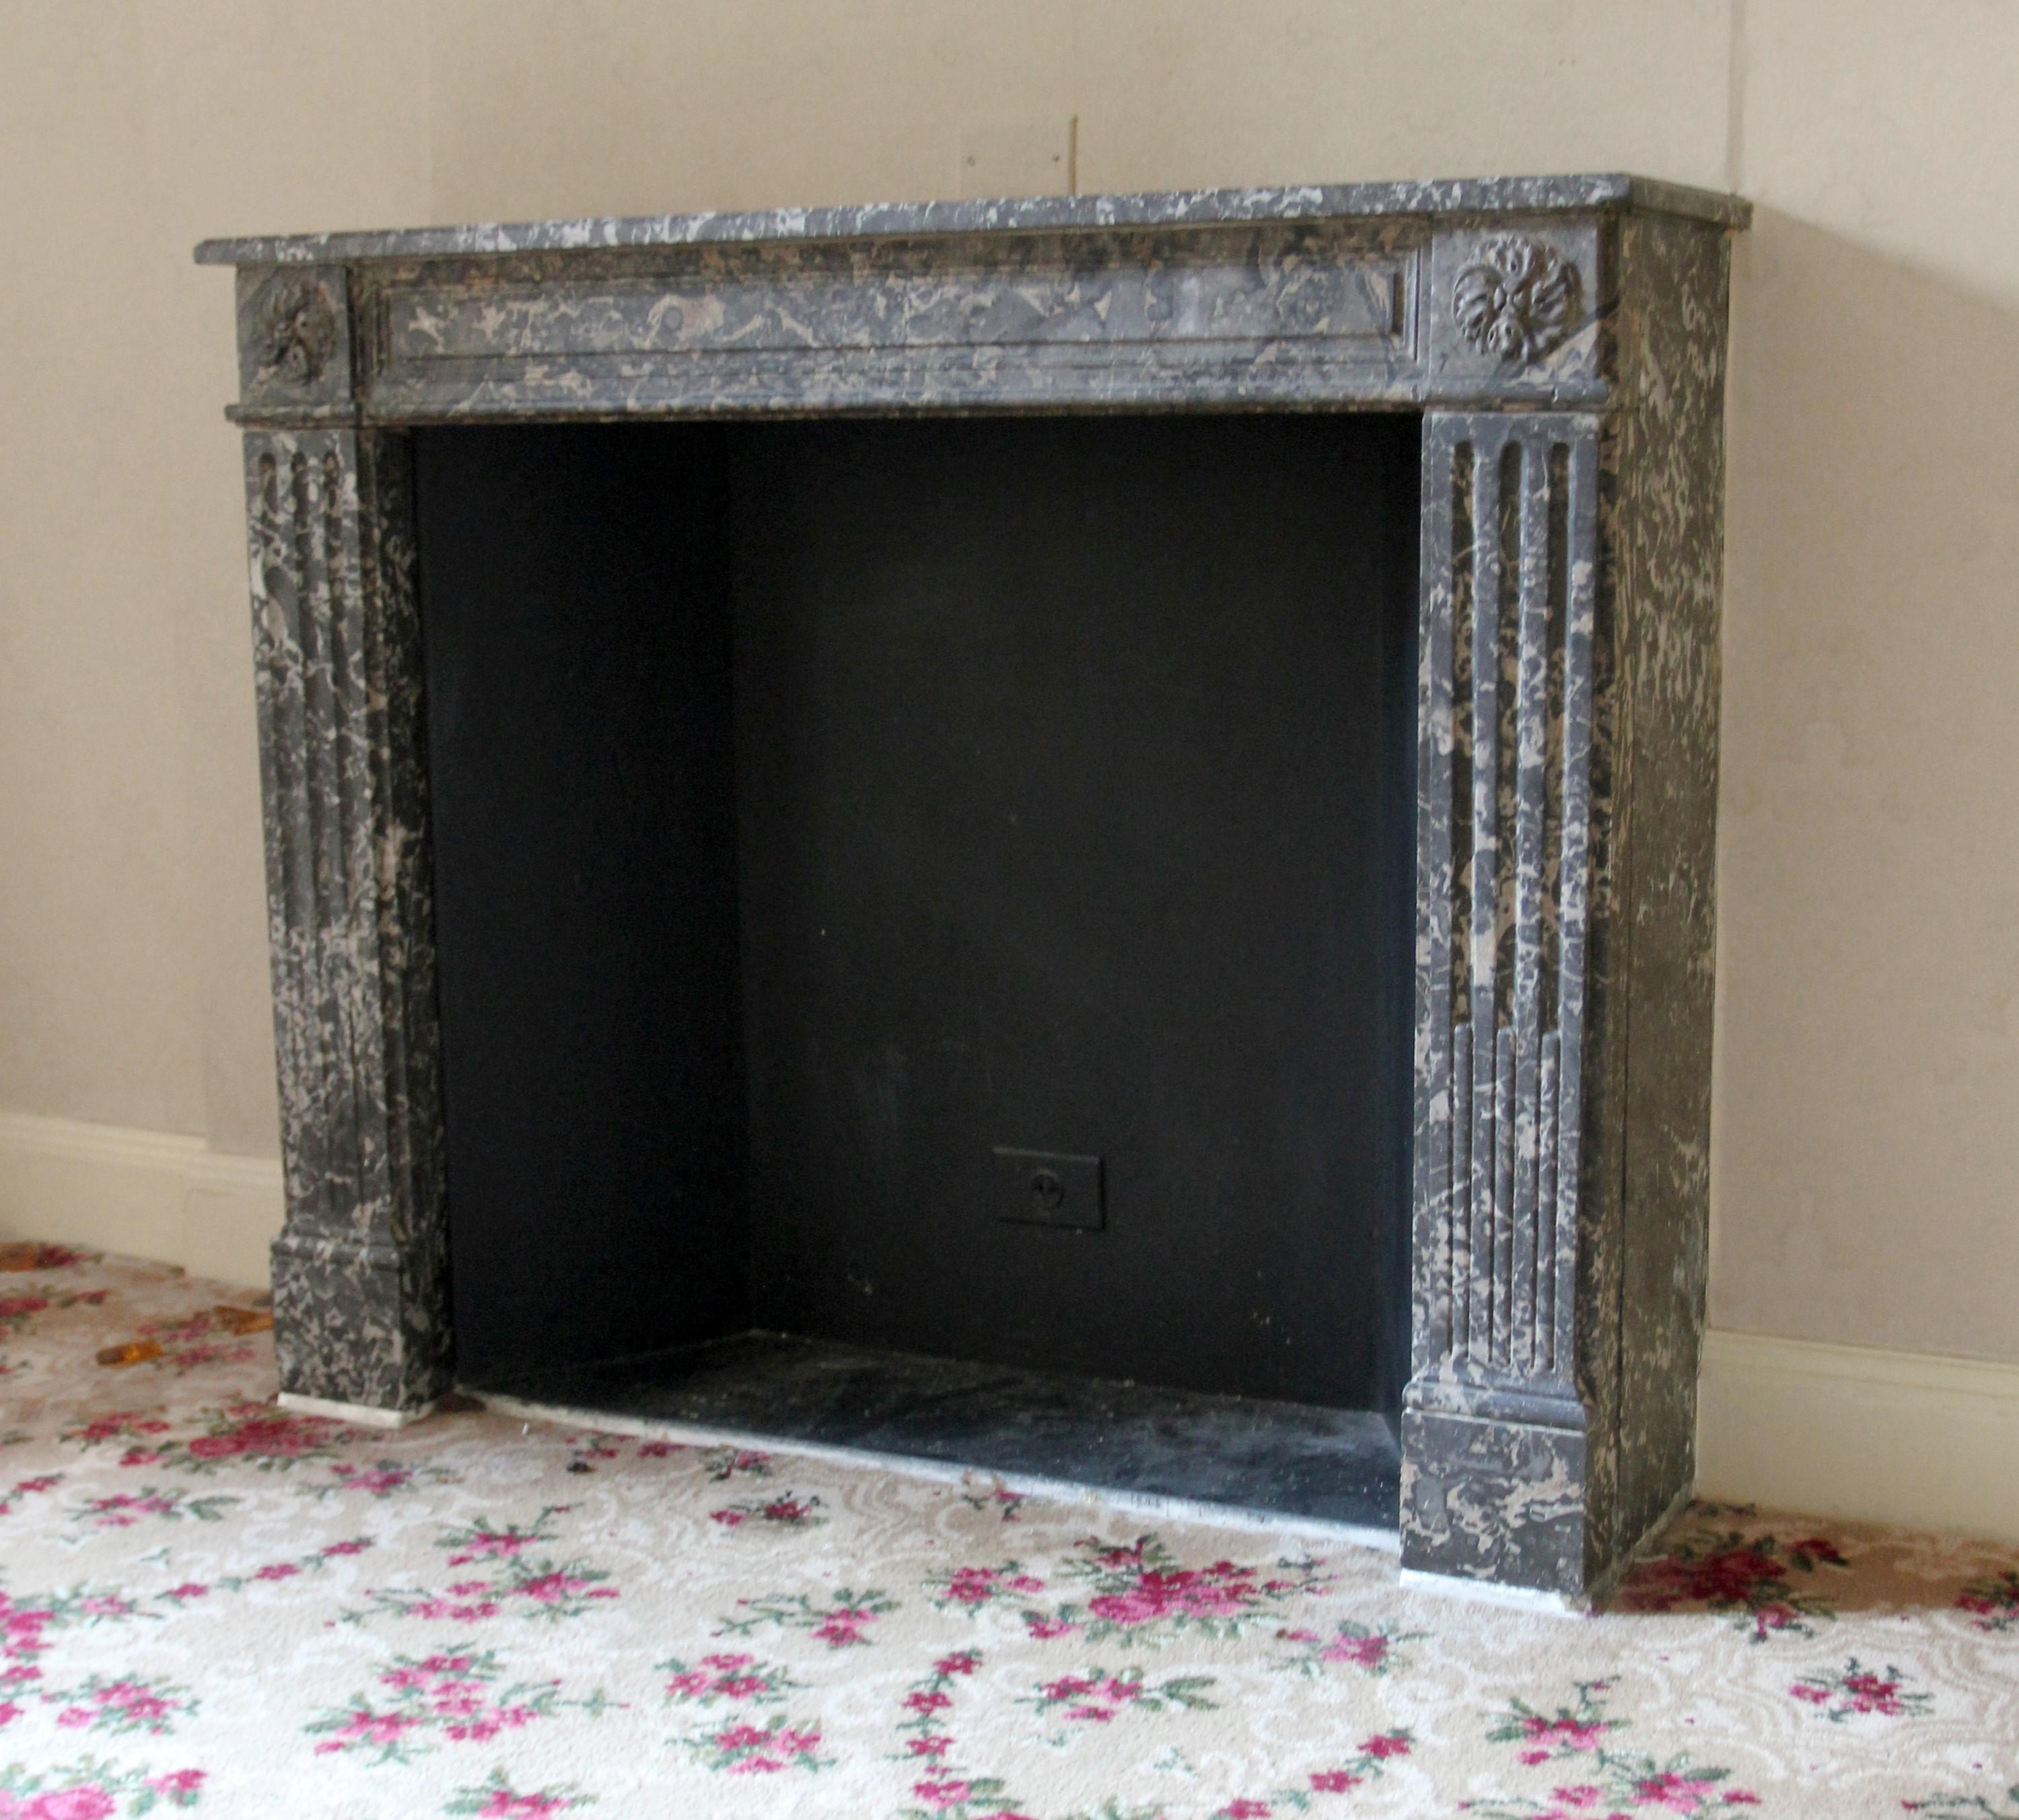 Early 20th century hand carved marble mantel made from gray and white veined marble. Each side features a fluted design and floral top corners. This mantel was brought over from France and installed in the then newly built Waldorf Astoria Hotel